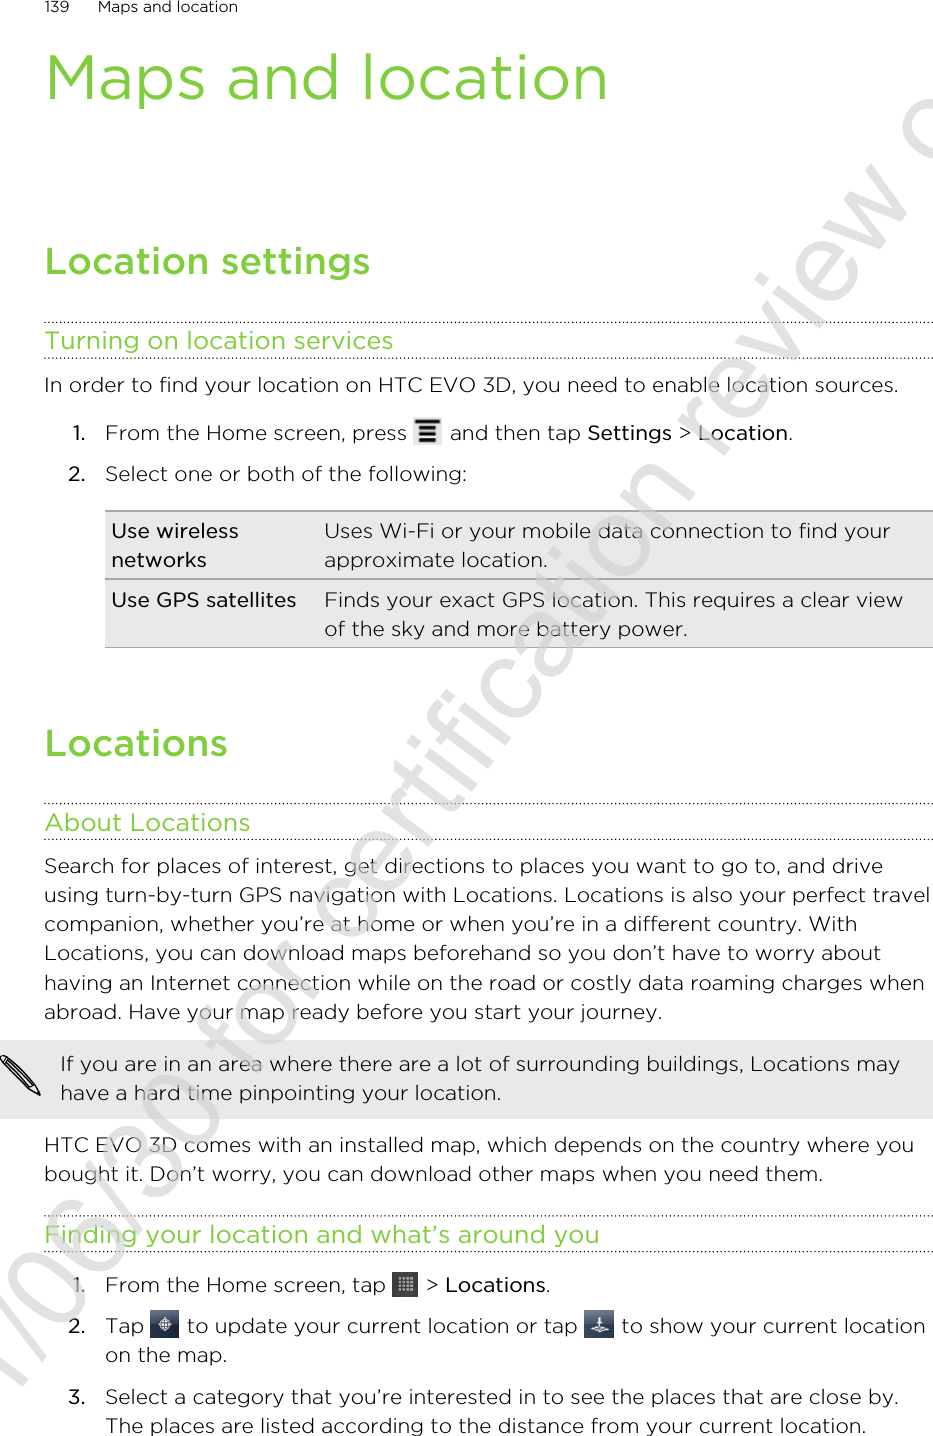 Maps and locationLocation settingsTurning on location servicesIn order to find your location on HTC EVO 3D, you need to enable location sources.1. From the Home screen, press   and then tap Settings &gt; Location.2. Select one or both of the following:Use wirelessnetworksUses Wi-Fi or your mobile data connection to find yourapproximate location.Use GPS satellites Finds your exact GPS location. This requires a clear viewof the sky and more battery power.LocationsAbout LocationsSearch for places of interest, get directions to places you want to go to, and driveusing turn-by-turn GPS navigation with Locations. Locations is also your perfect travelcompanion, whether you’re at home or when you’re in a different country. WithLocations, you can download maps beforehand so you don’t have to worry abouthaving an Internet connection while on the road or costly data roaming charges whenabroad. Have your map ready before you start your journey.If you are in an area where there are a lot of surrounding buildings, Locations mayhave a hard time pinpointing your location.HTC EVO 3D comes with an installed map, which depends on the country where youbought it. Don’t worry, you can download other maps when you need them.Finding your location and what’s around you1. From the Home screen, tap   &gt; Locations.2. Tap   to update your current location or tap   to show your current locationon the map.3. Select a category that you’re interested in to see the places that are close by.The places are listed according to the distance from your current location.139 Maps and location2011/06/30 for certification review only